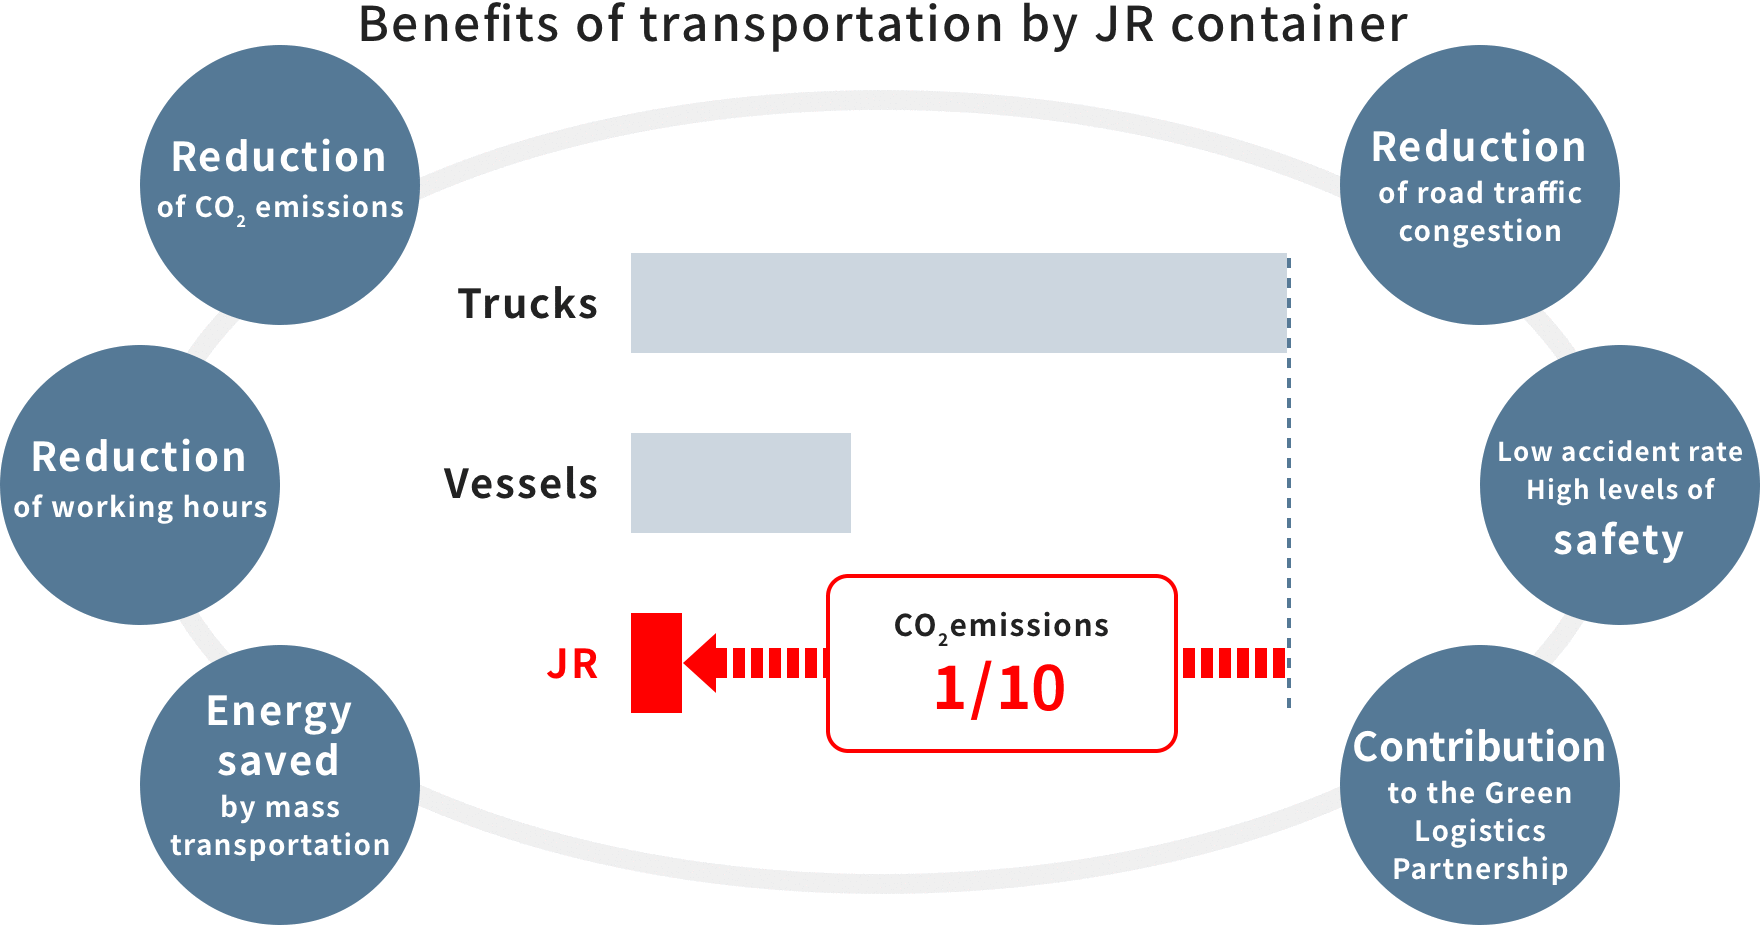 Benefits of transportation by JR container